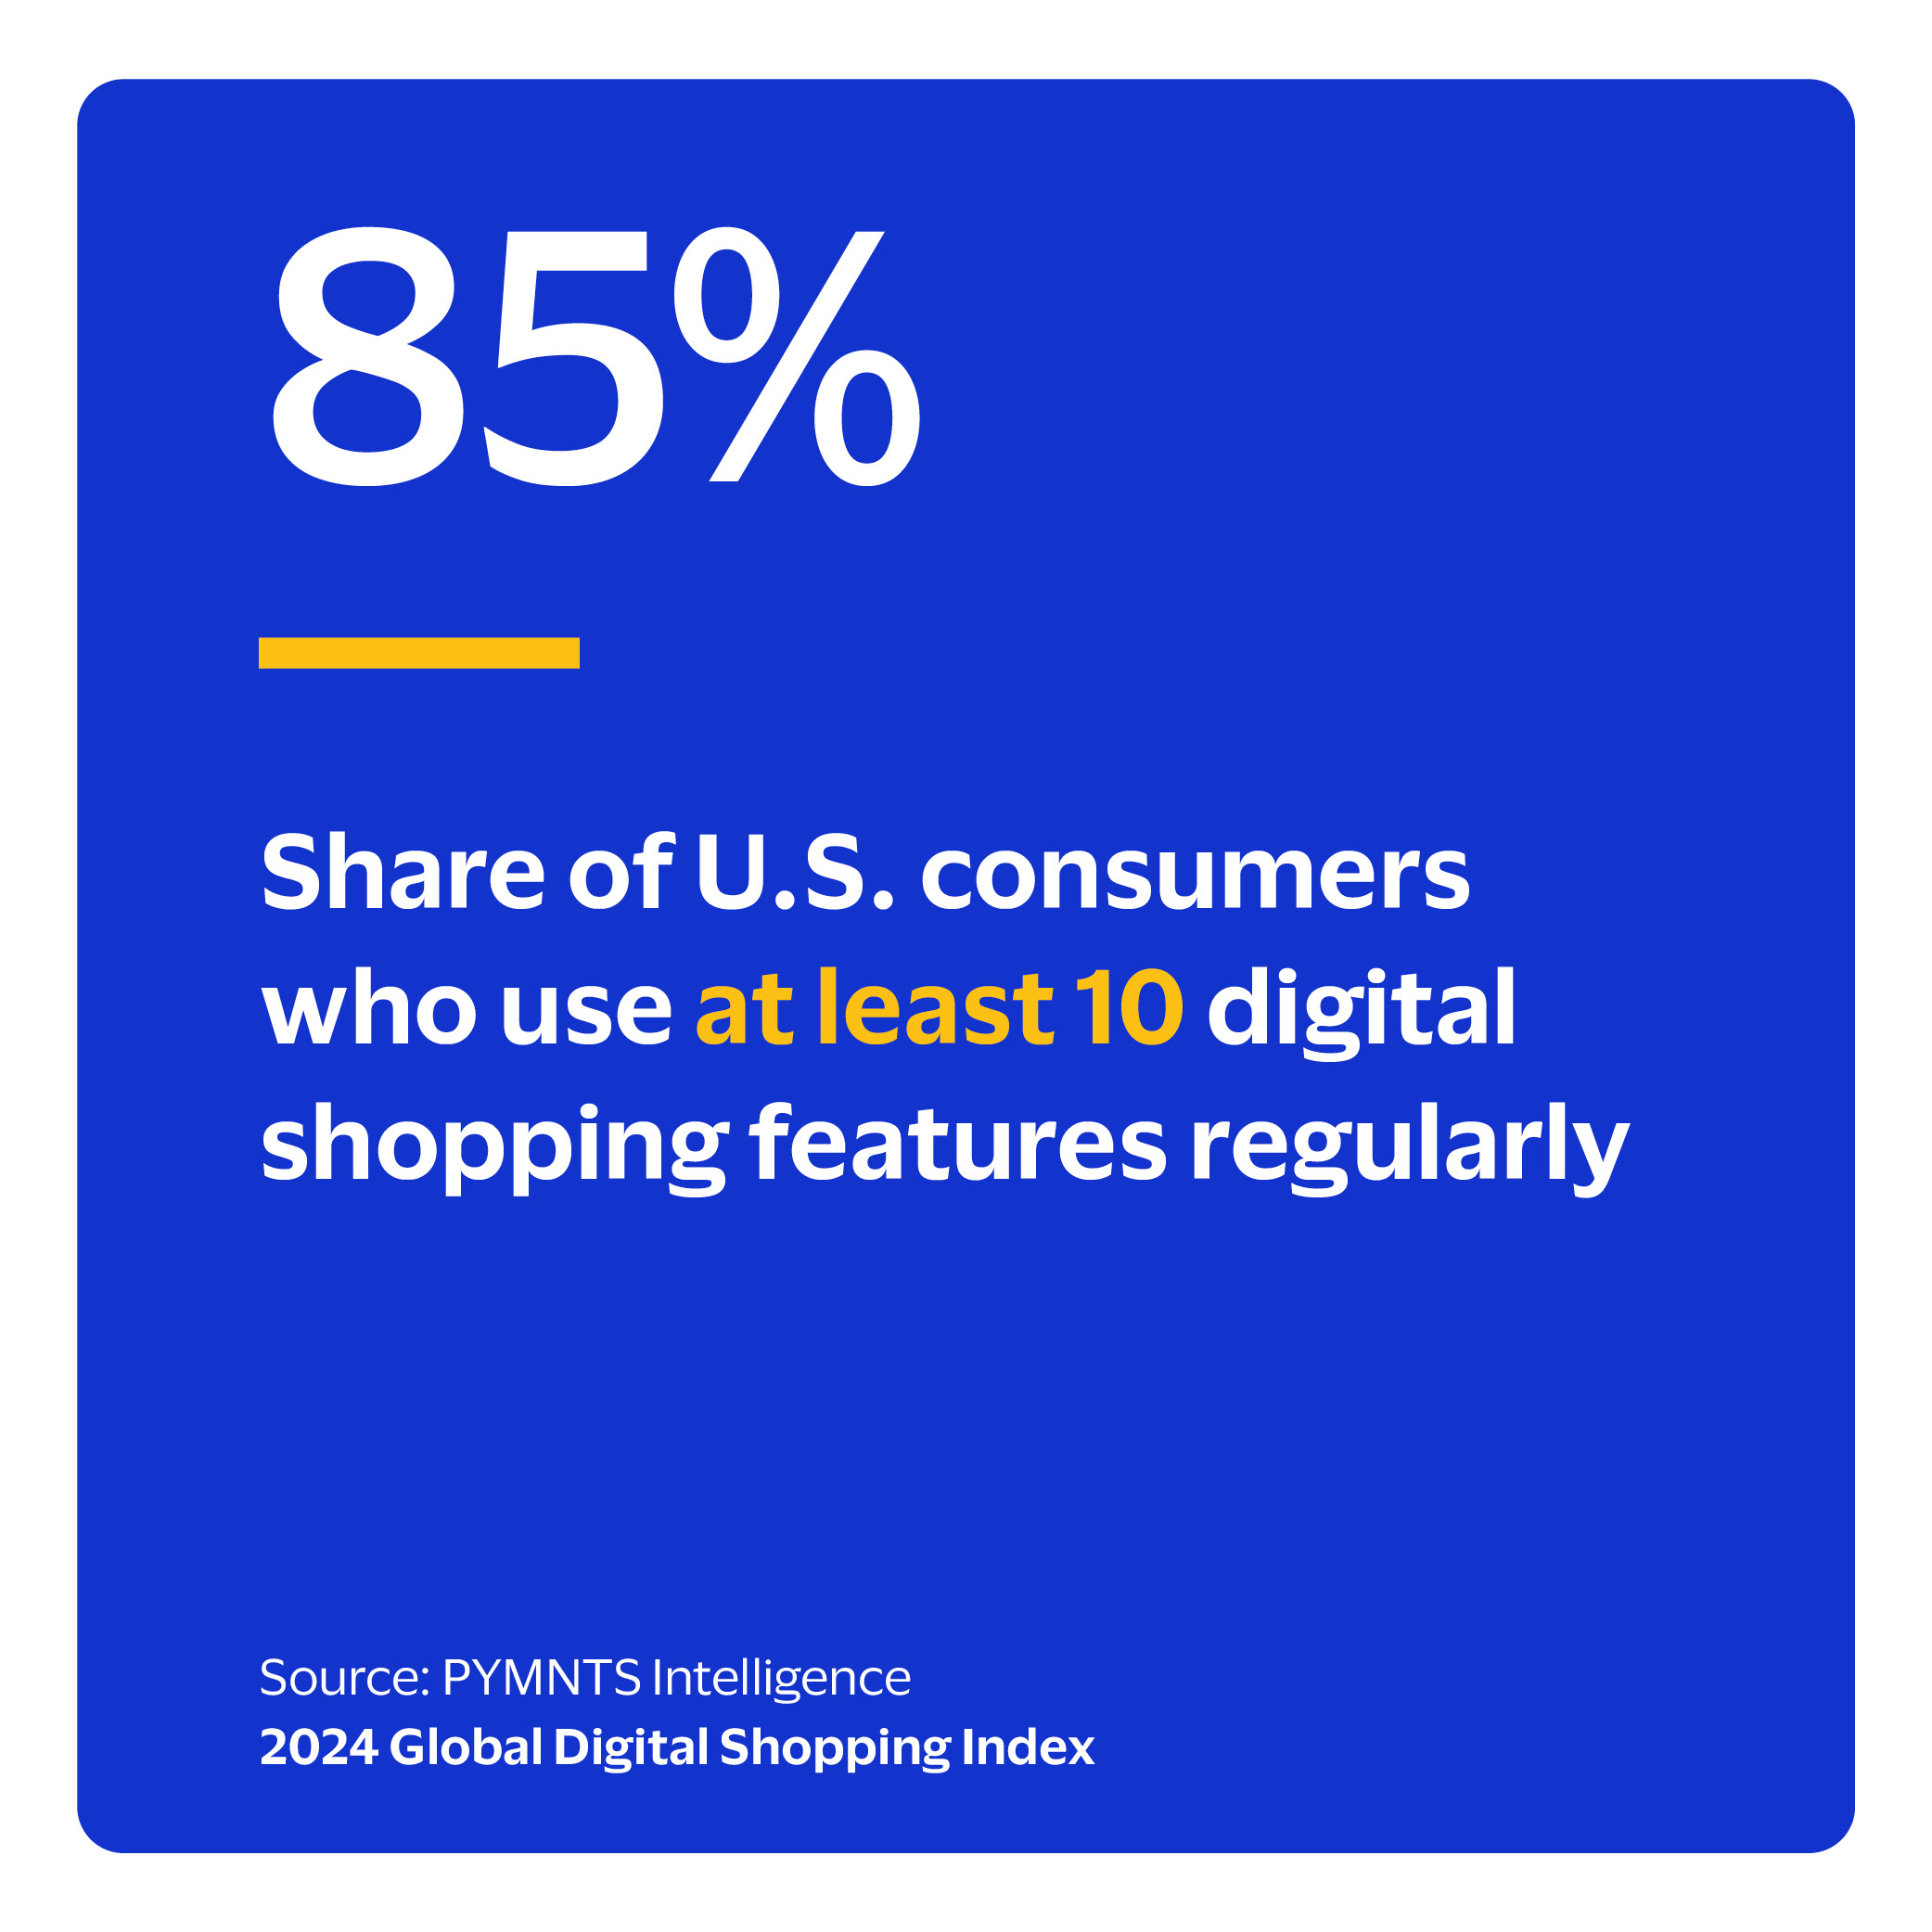  Share of U.S. consumers who use at least 10 digital shopping features regularly